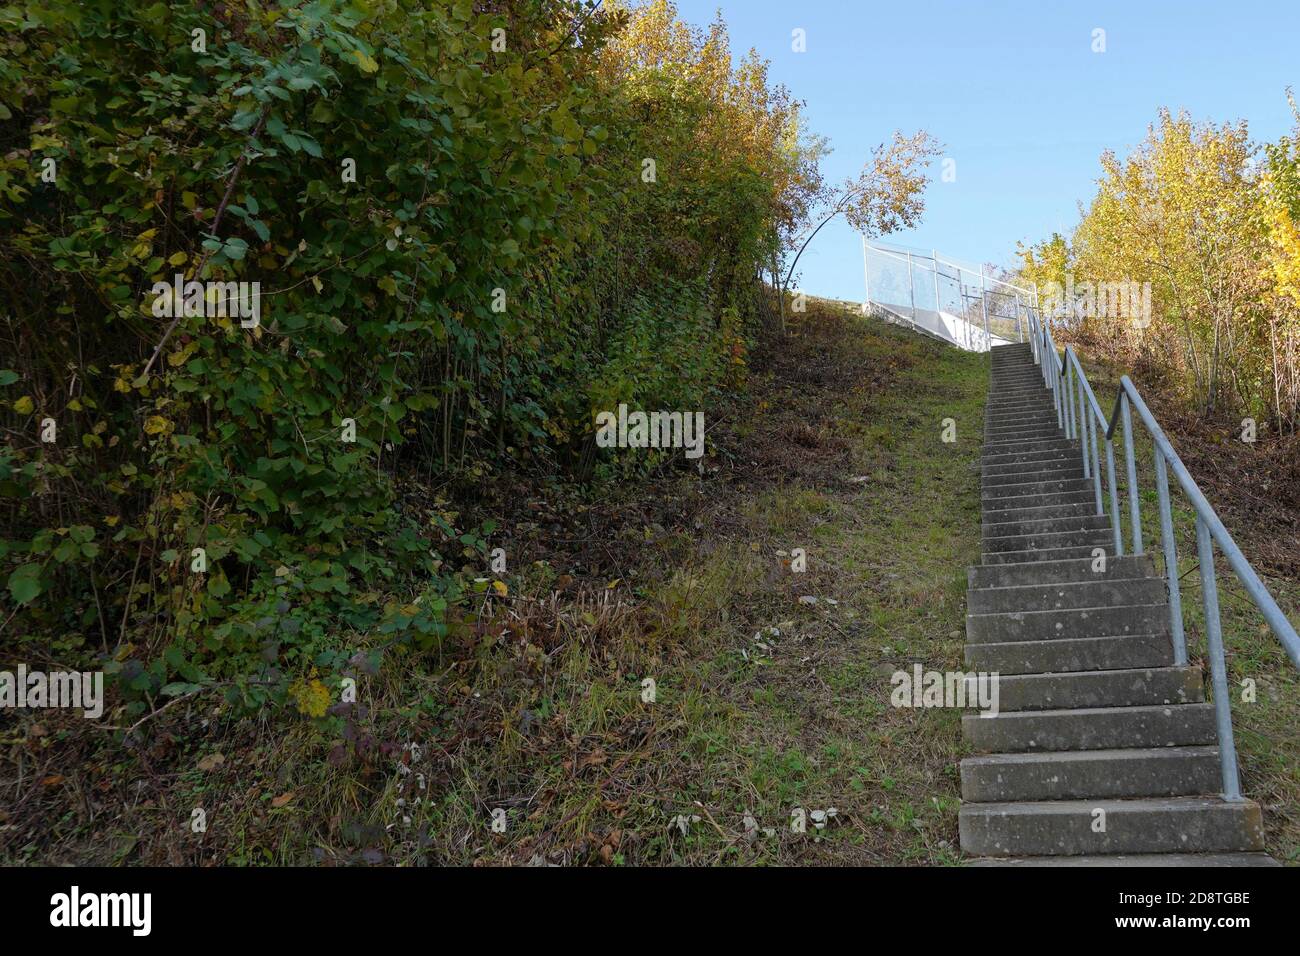 Emergency staircase from an emergency exit on  a highway. The staircase is made of cement and has a metal railings on one side, it is bordered on both Stock Photo